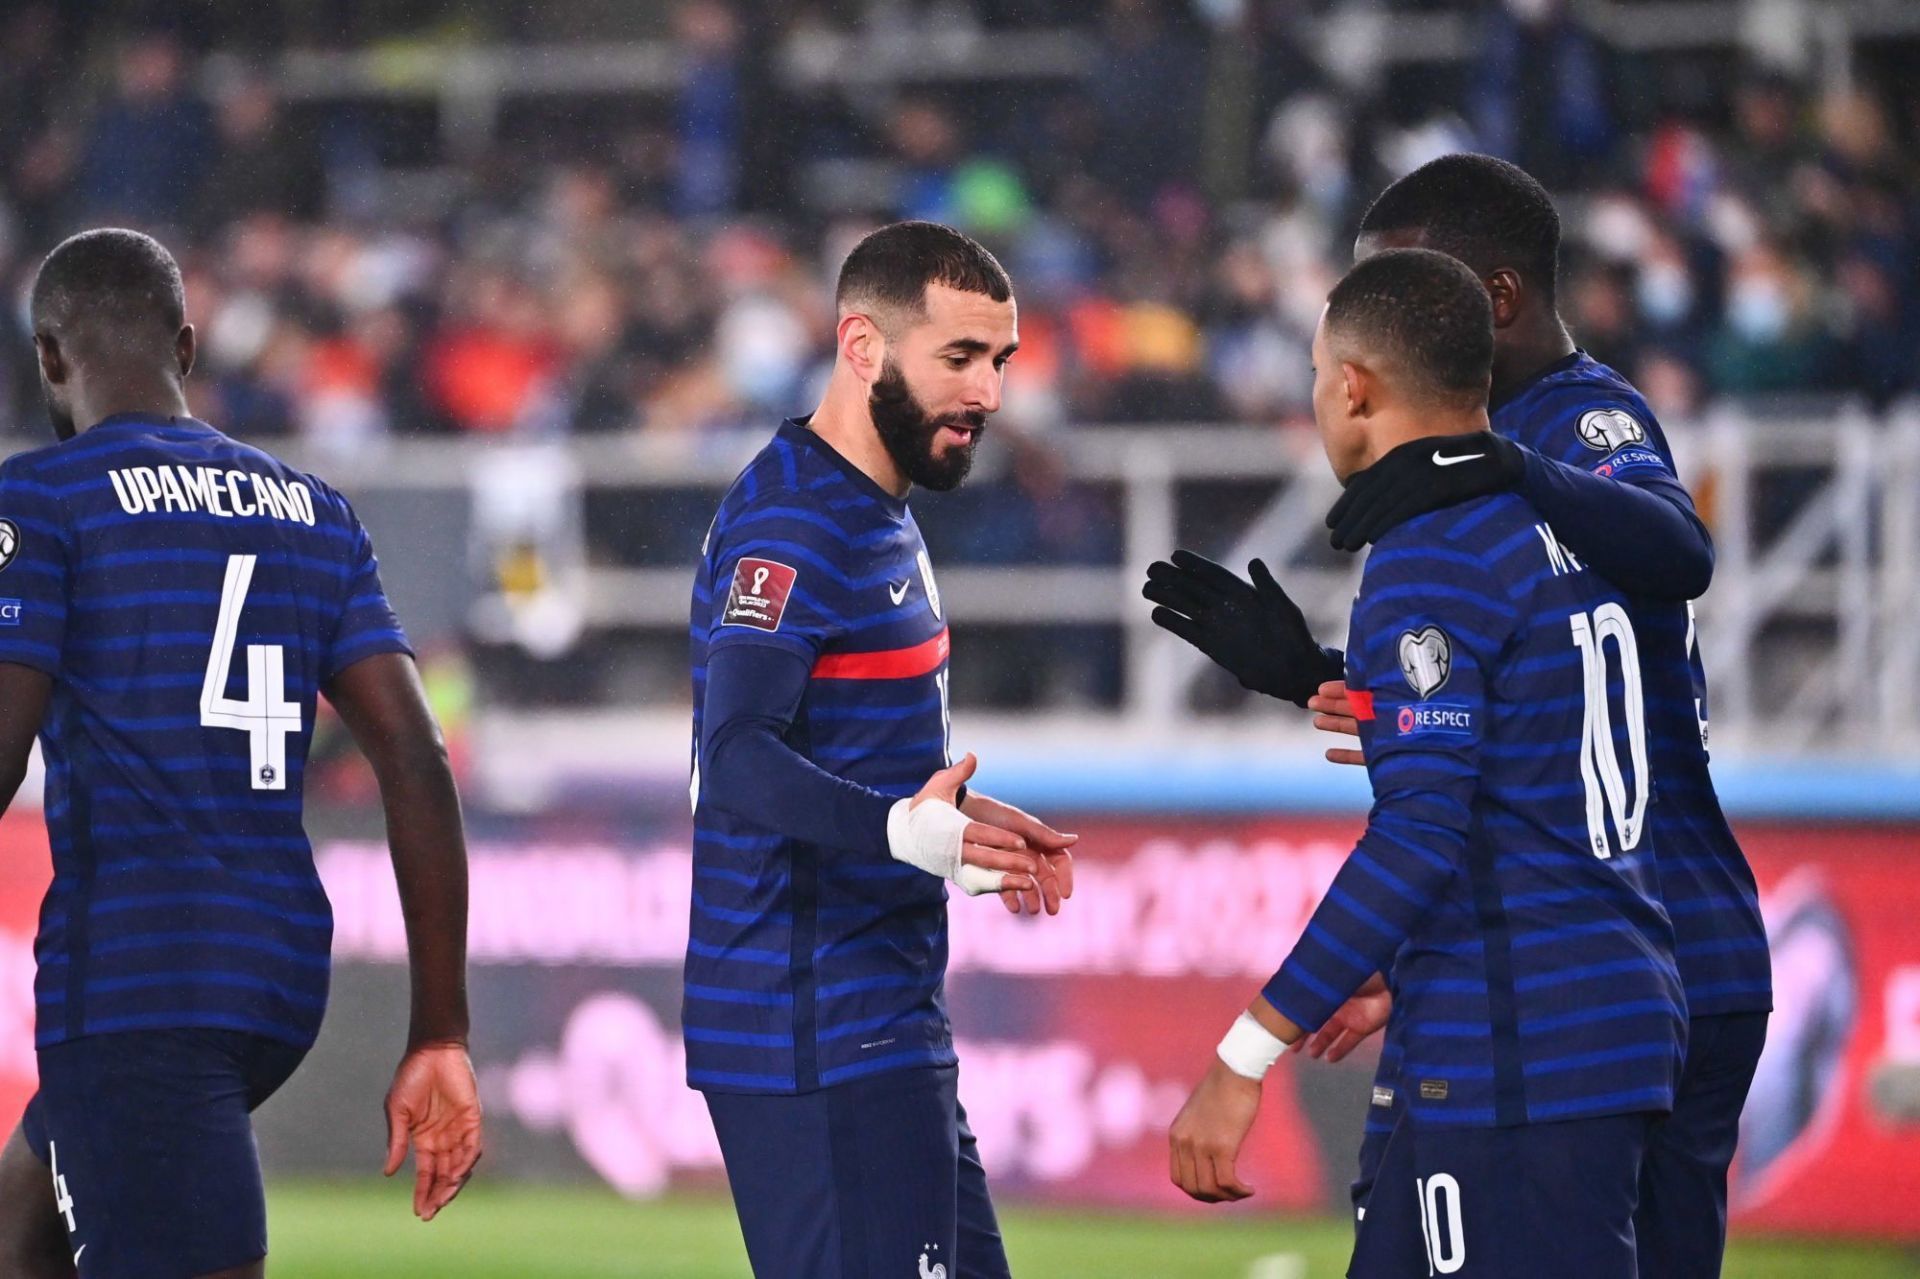 France capped off a fine qualifying campaign with a routine victory